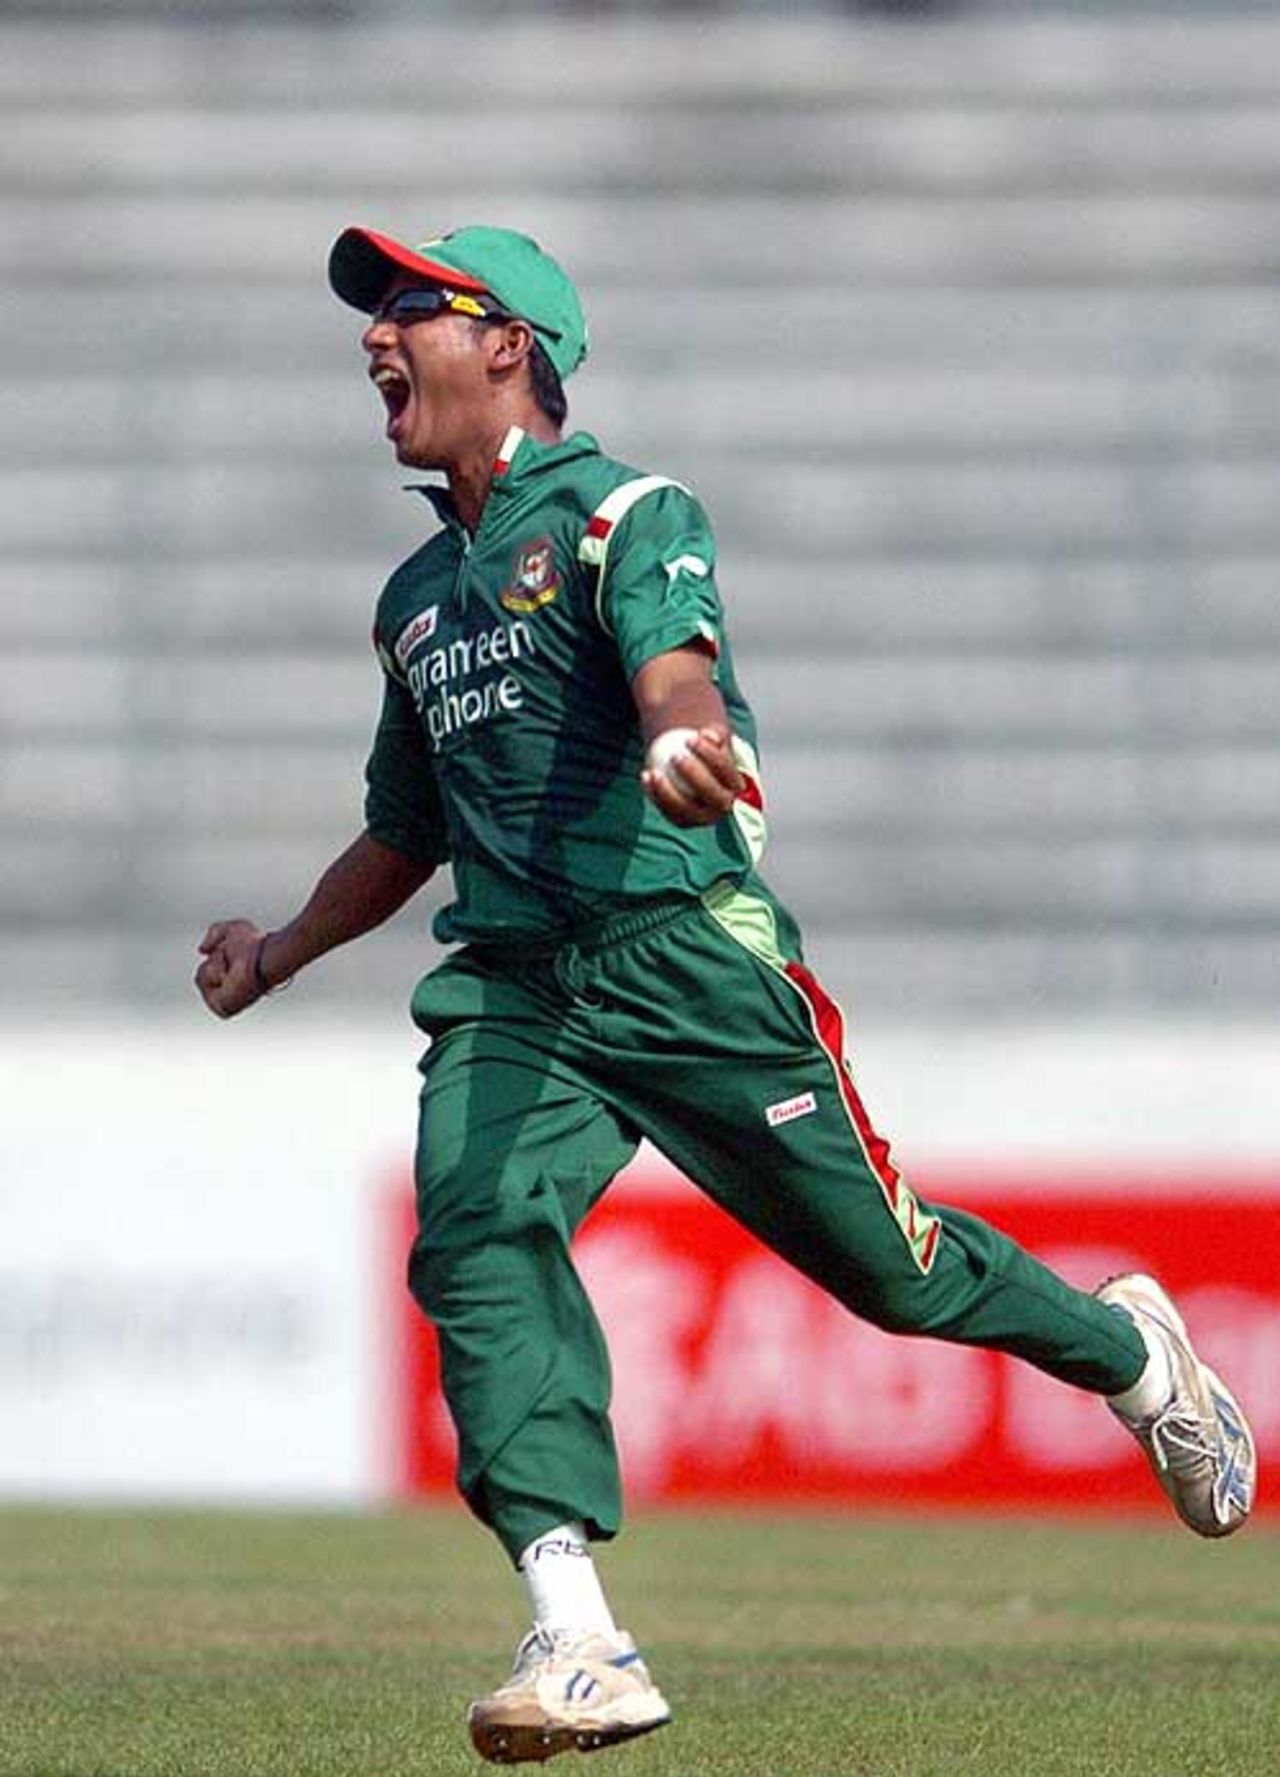 More reason for Mohammad Ashraful to celebrate as New Zealand collapse, Bangladesh v New Zealand, 2nd ODI, Mirpur, October 11, 2008